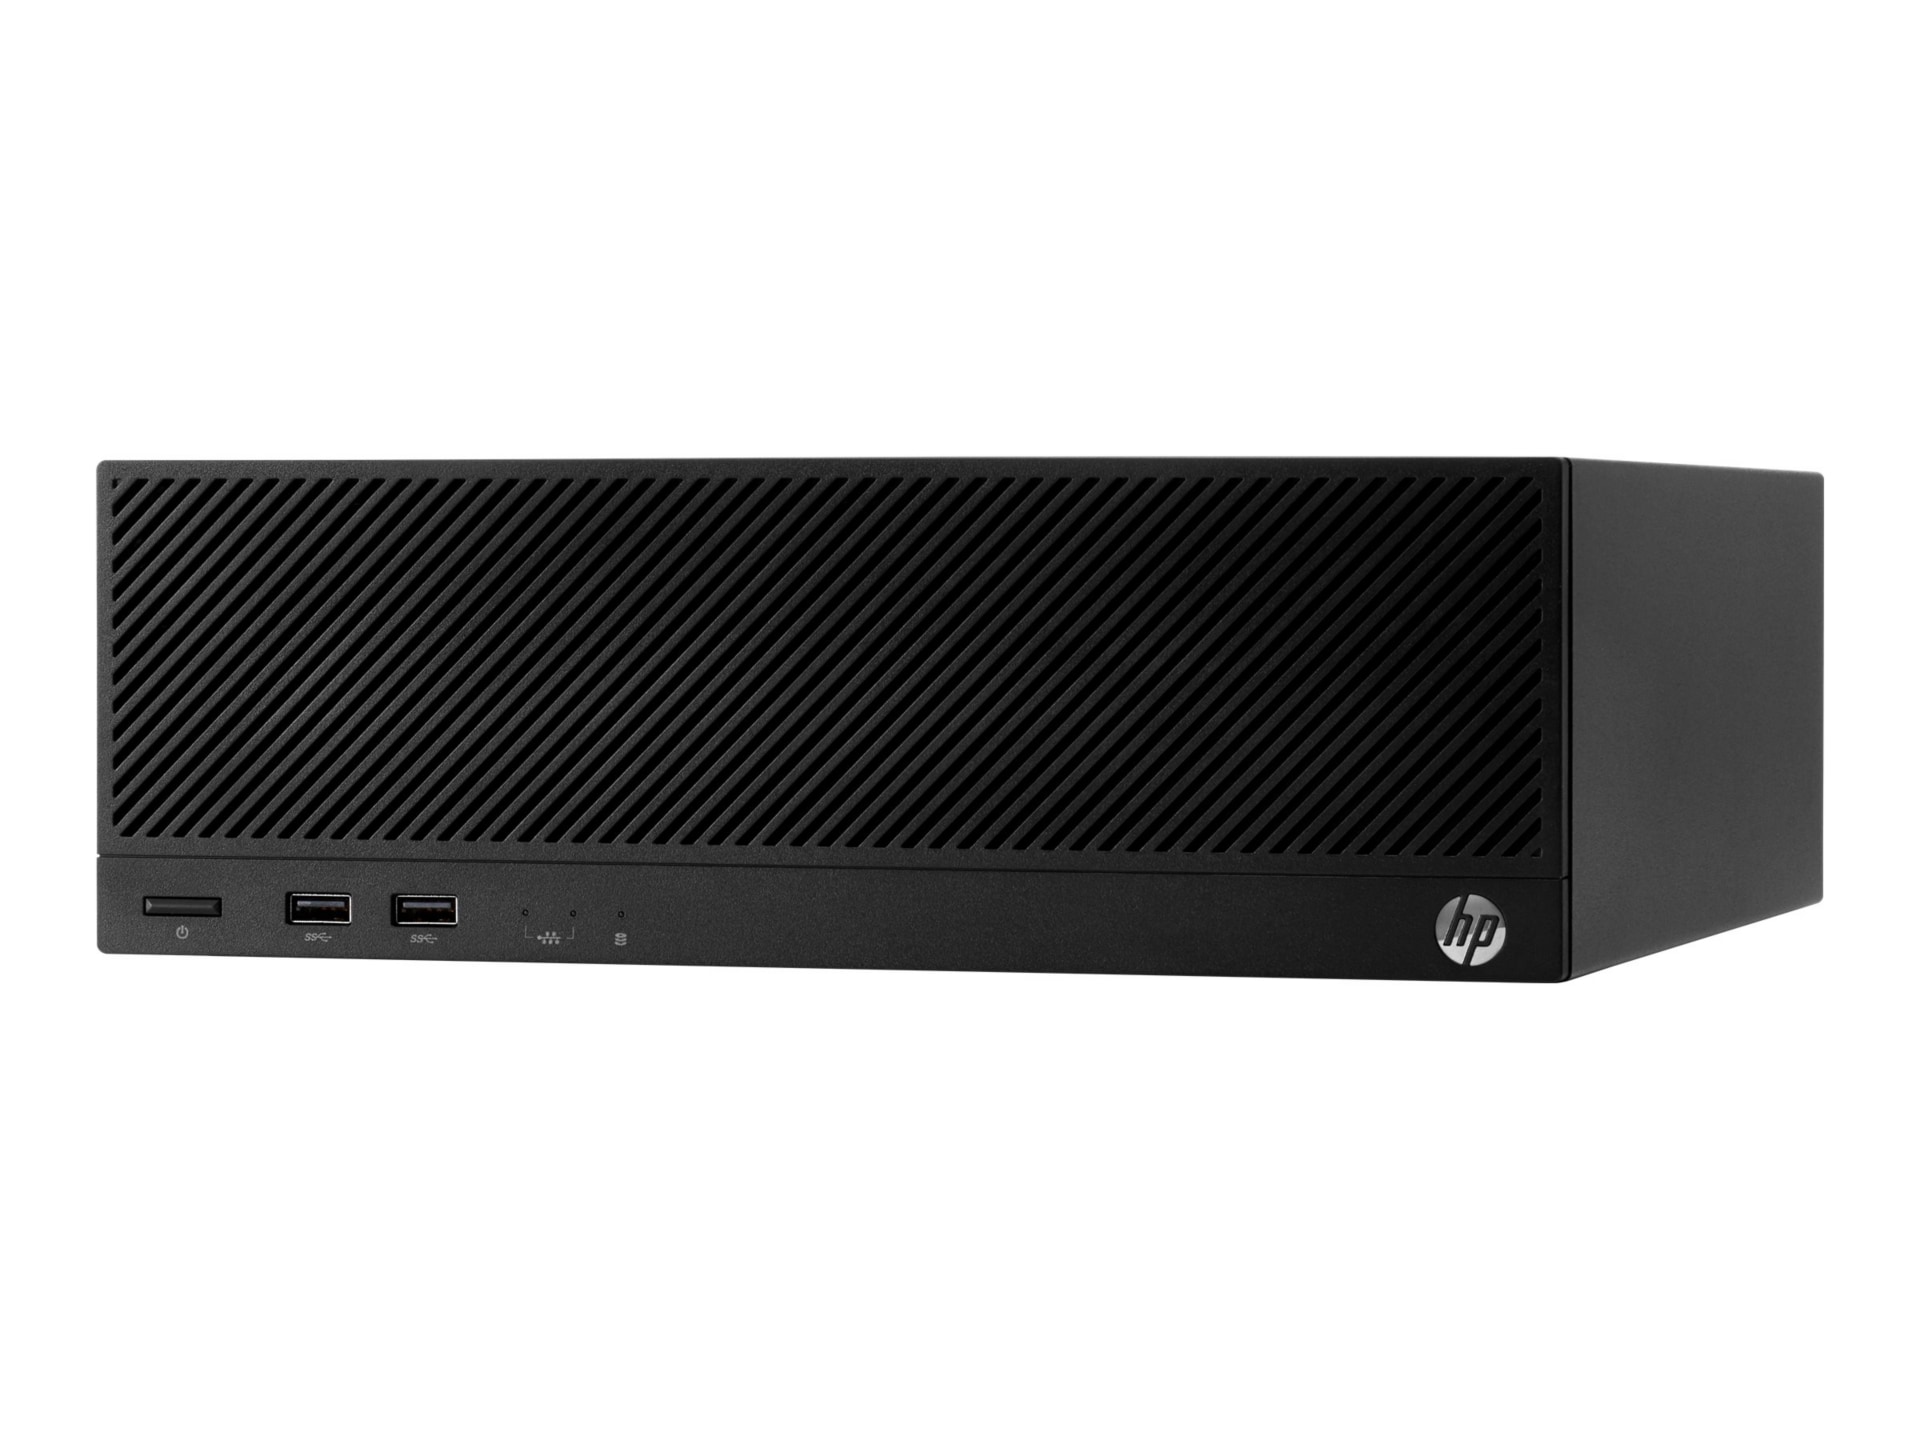 HP Engage Flex Pro-C Retail System - USFF - Core i5 8500 3 GHz - vPro - 8 GB - SSD 256 GB - US